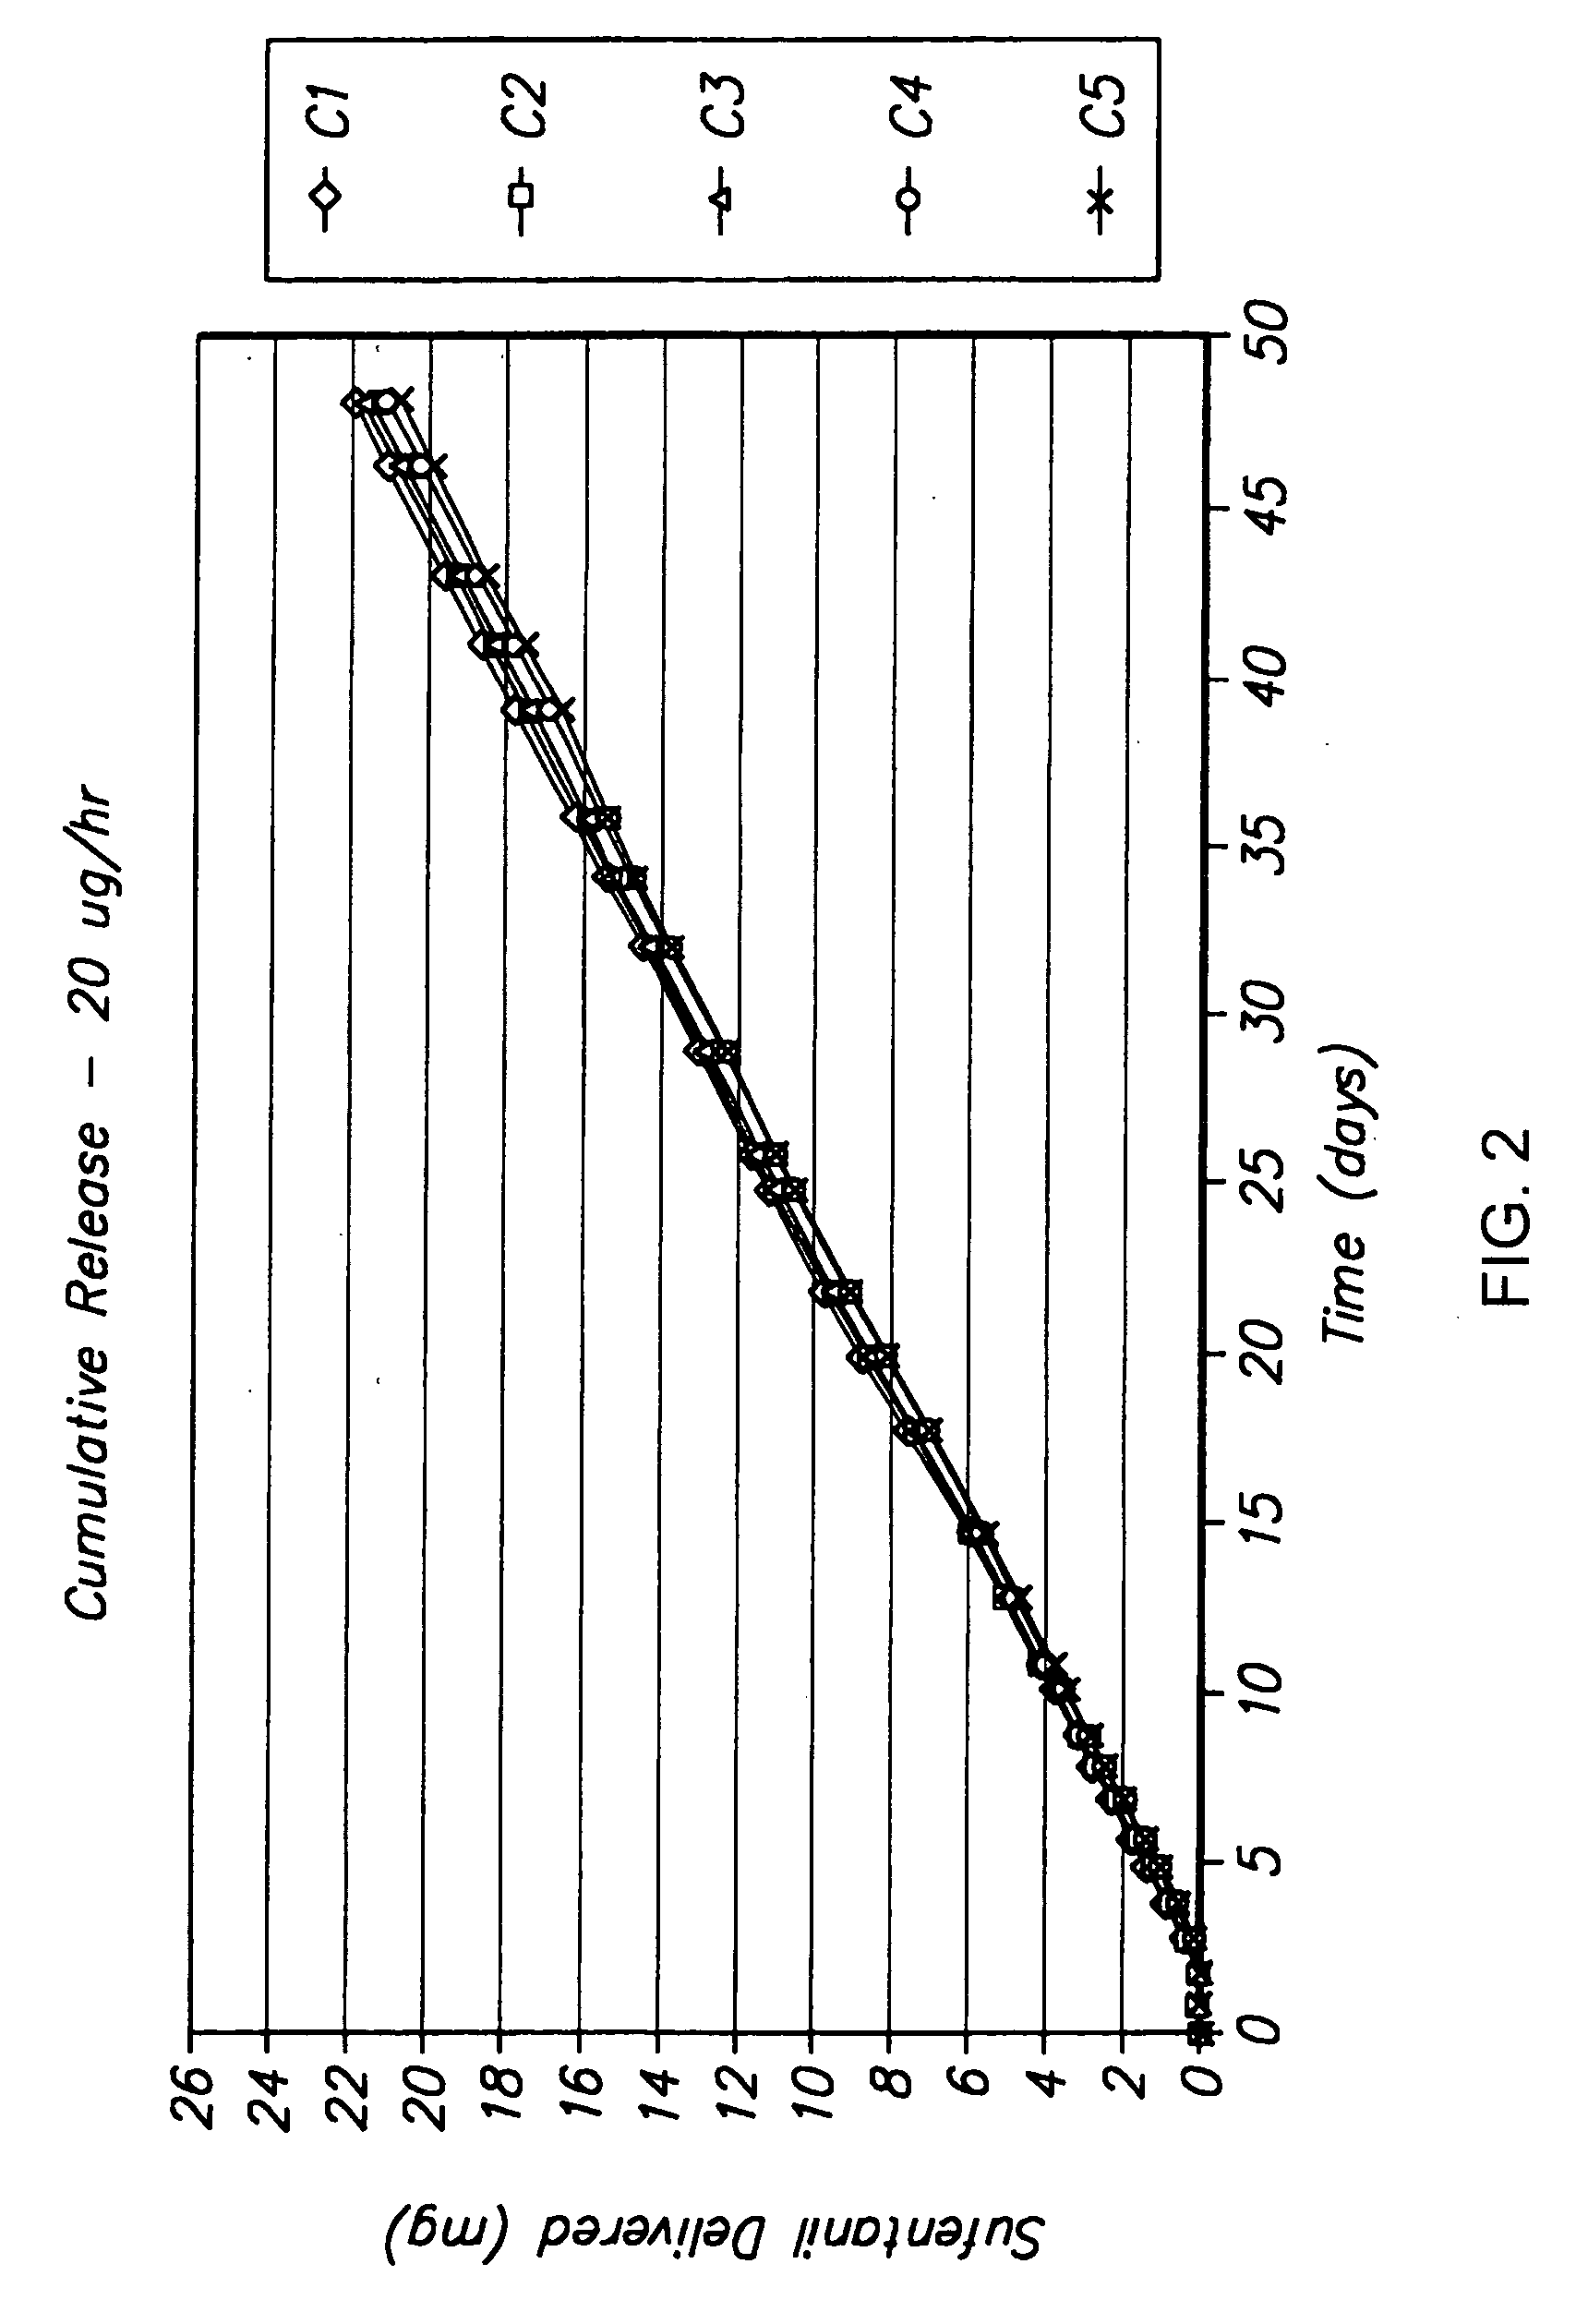 Implantable devices and methods for treatment of pain by delivery of fentanyl and fentanyl congeners